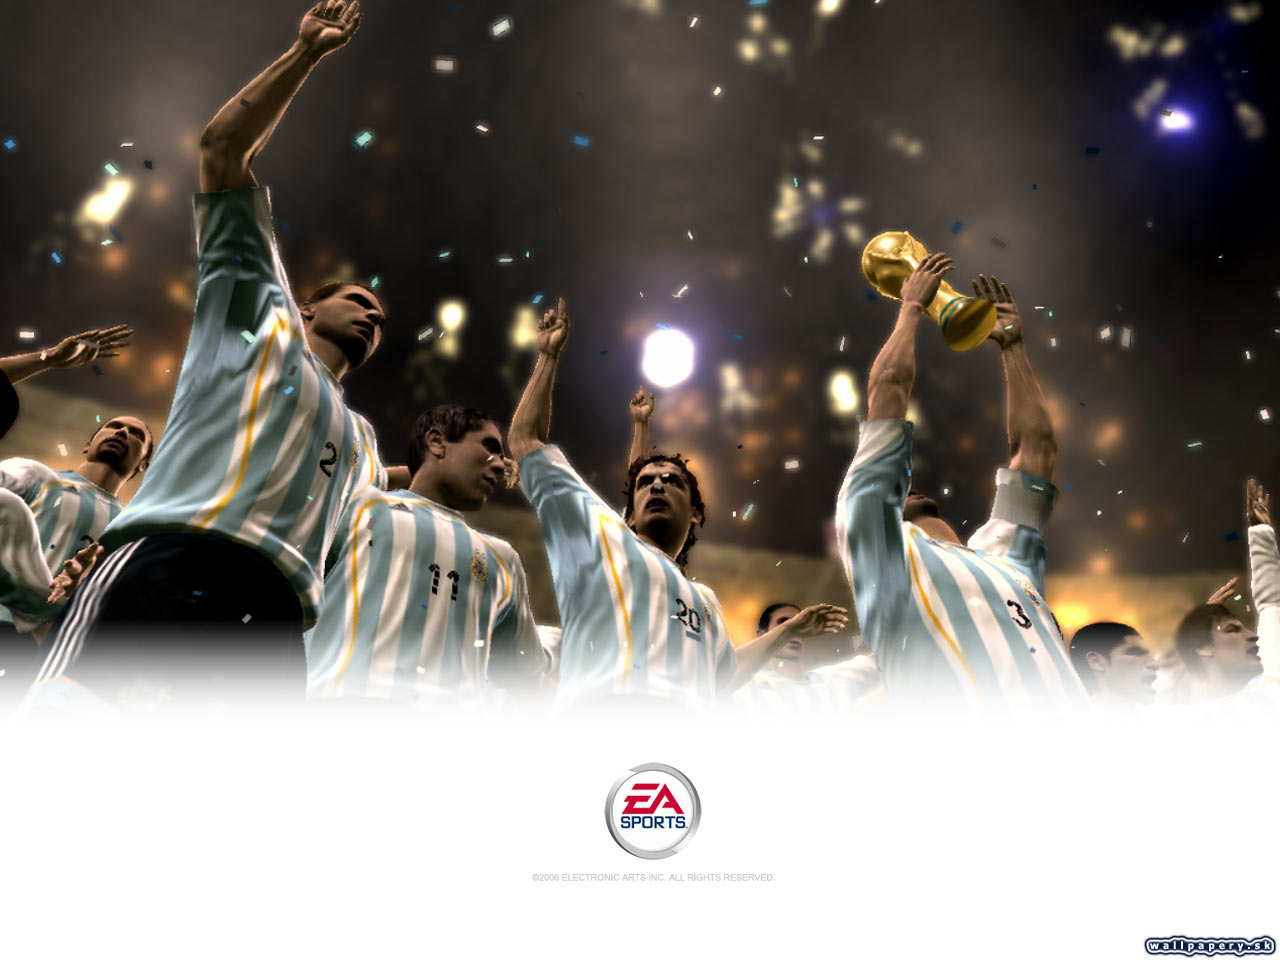 2006 FIFA World Cup Germany - wallpaper 2